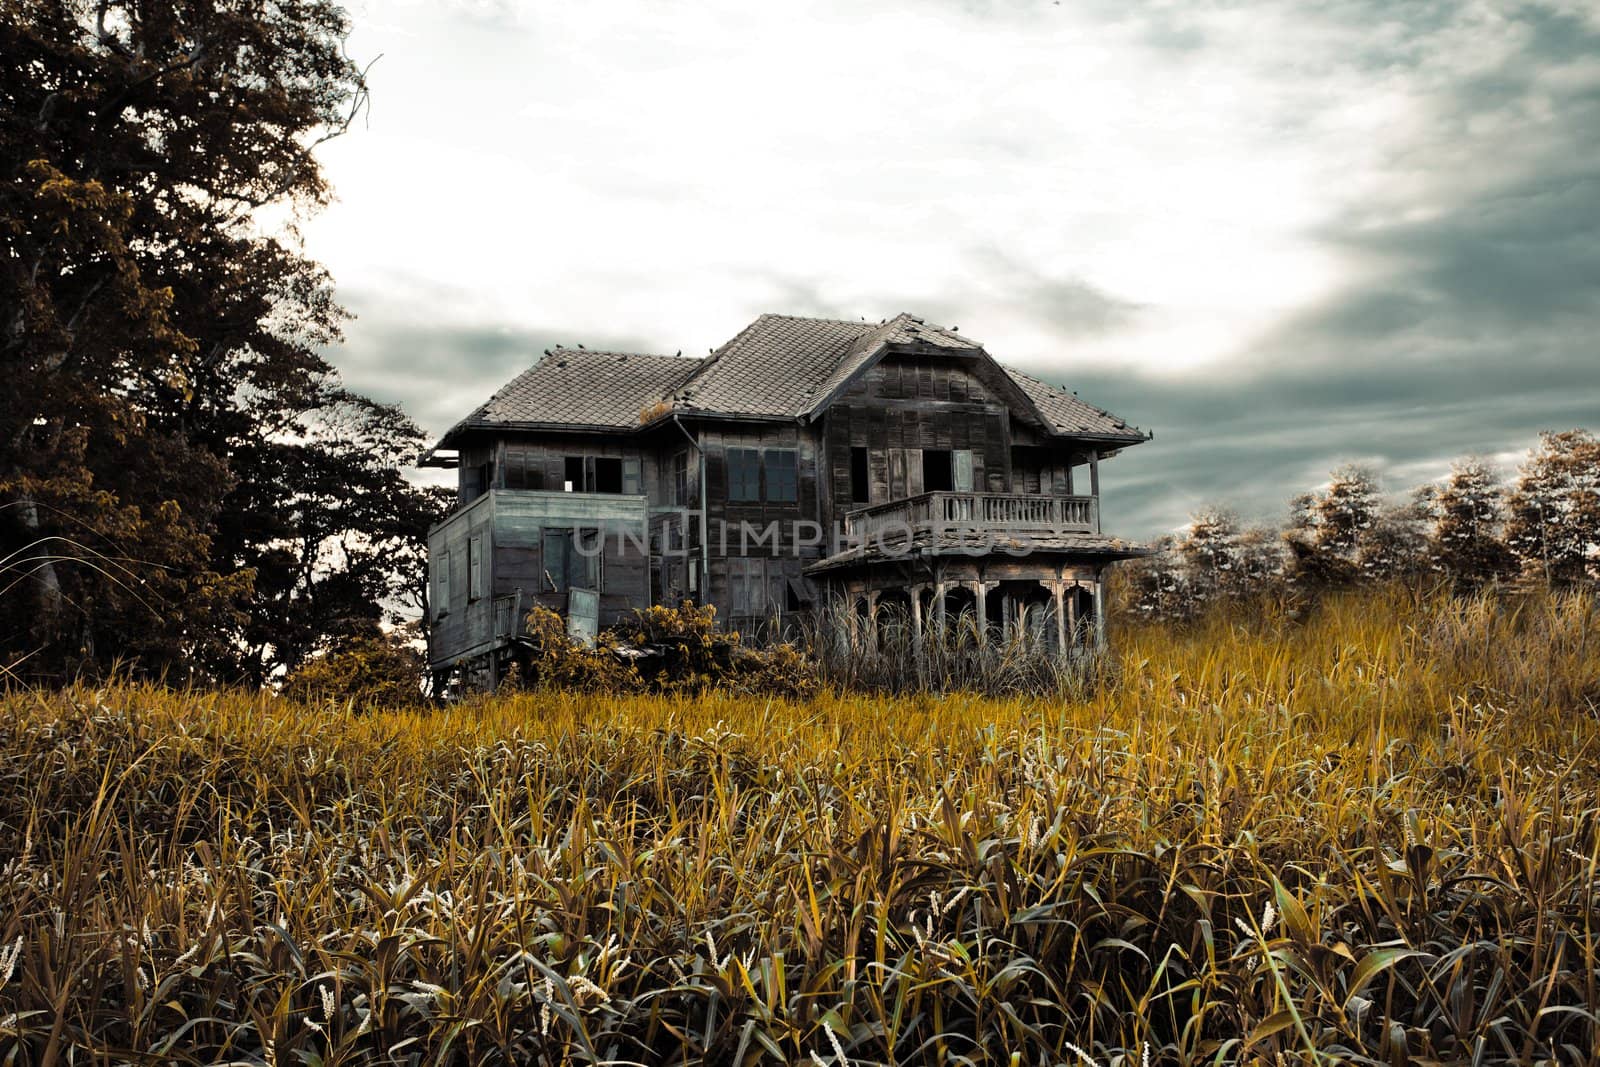 abandoned old house in Thailand